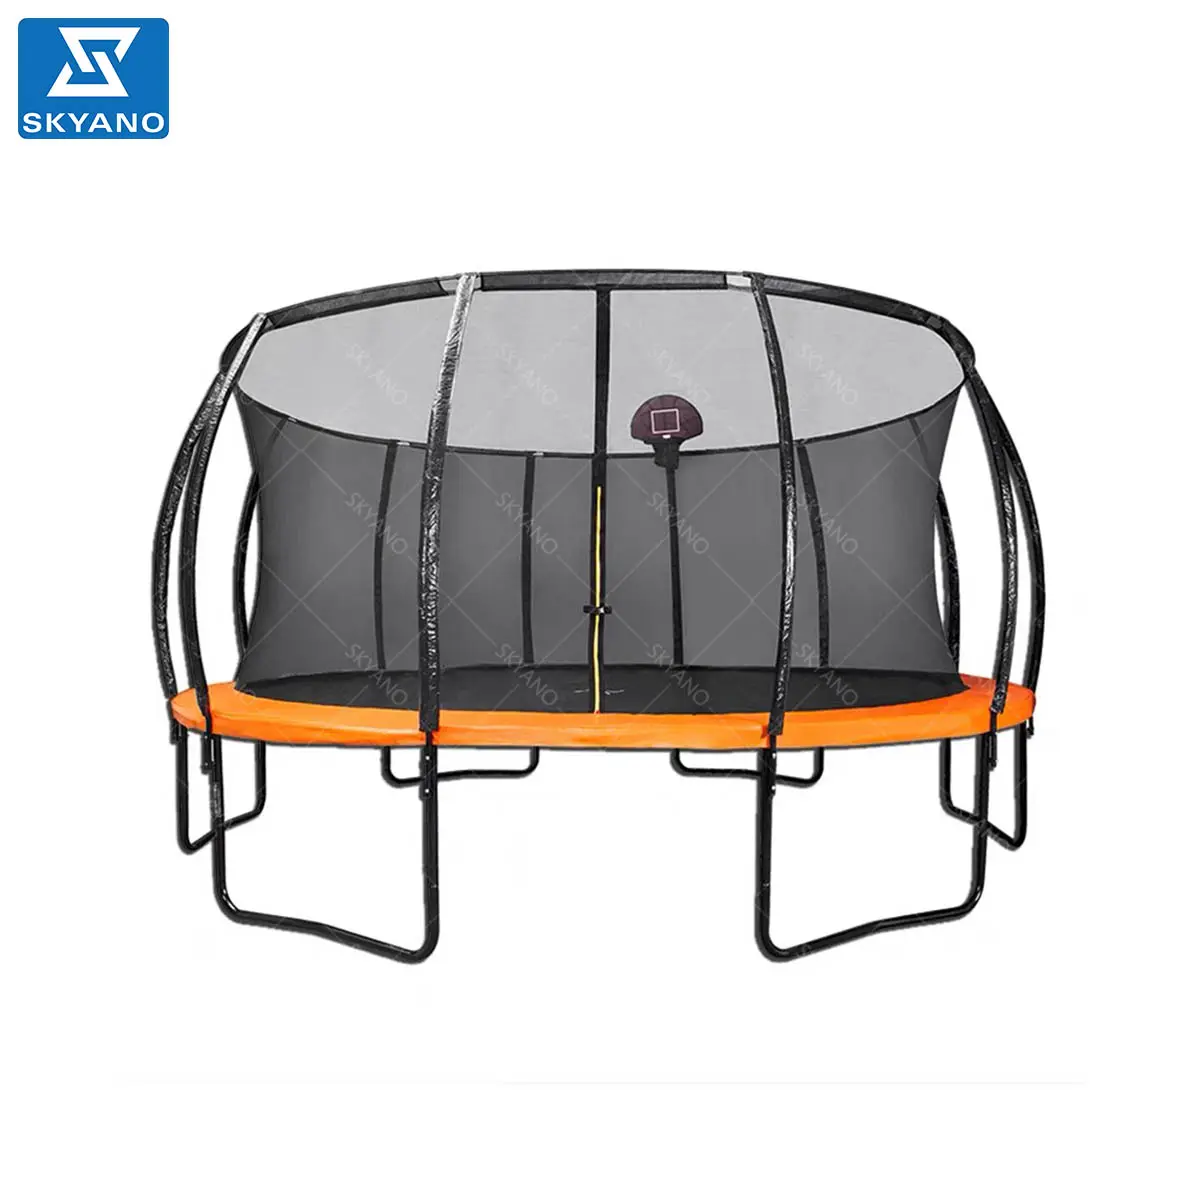 Fitness trampoline with guard net for children